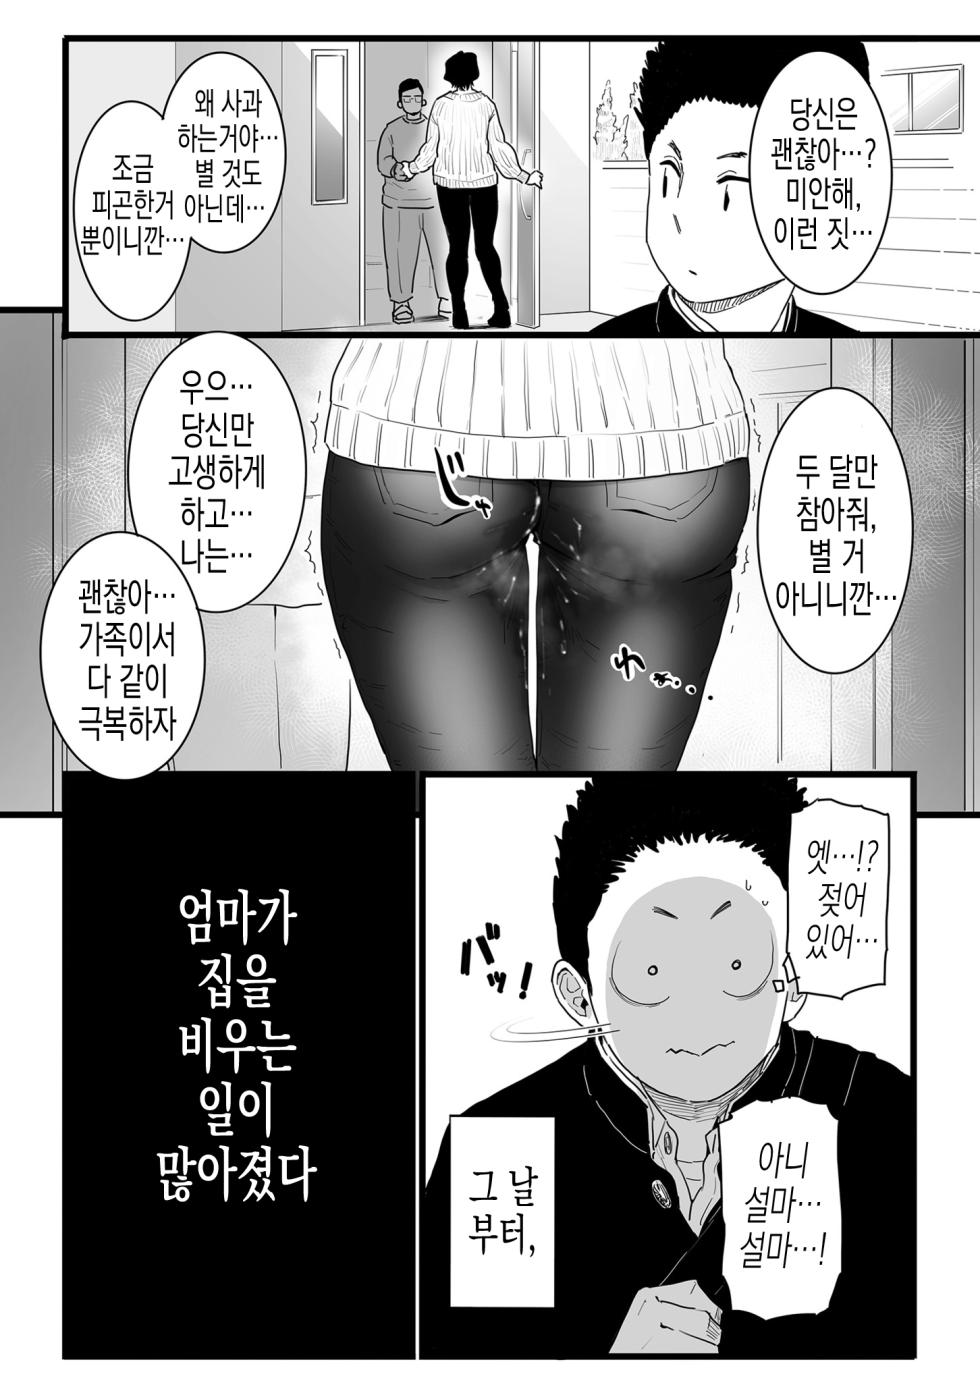 [CHOMA] Mesu Dorei Sengen - A chain of nightmares, Six heroines become ME DOREI in front of a big, strong cxxk...? | 암컷 노예 선언 [Korean] [실루엣21] [Digital] - Page 10